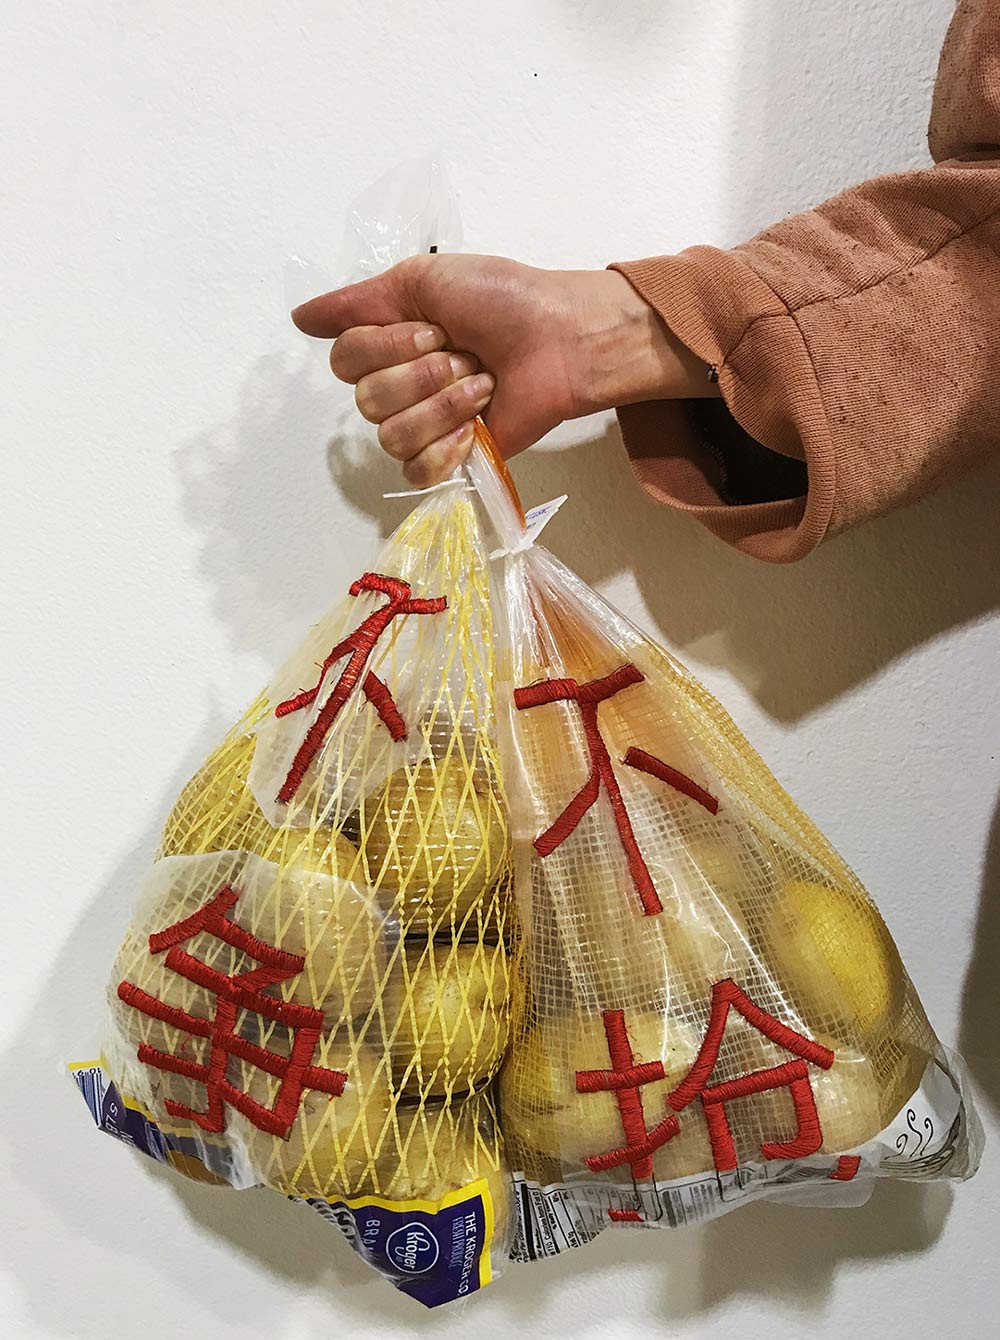 Close up on person's hand holding a mesh pacakge of golden potatoes with red characters running down the package.